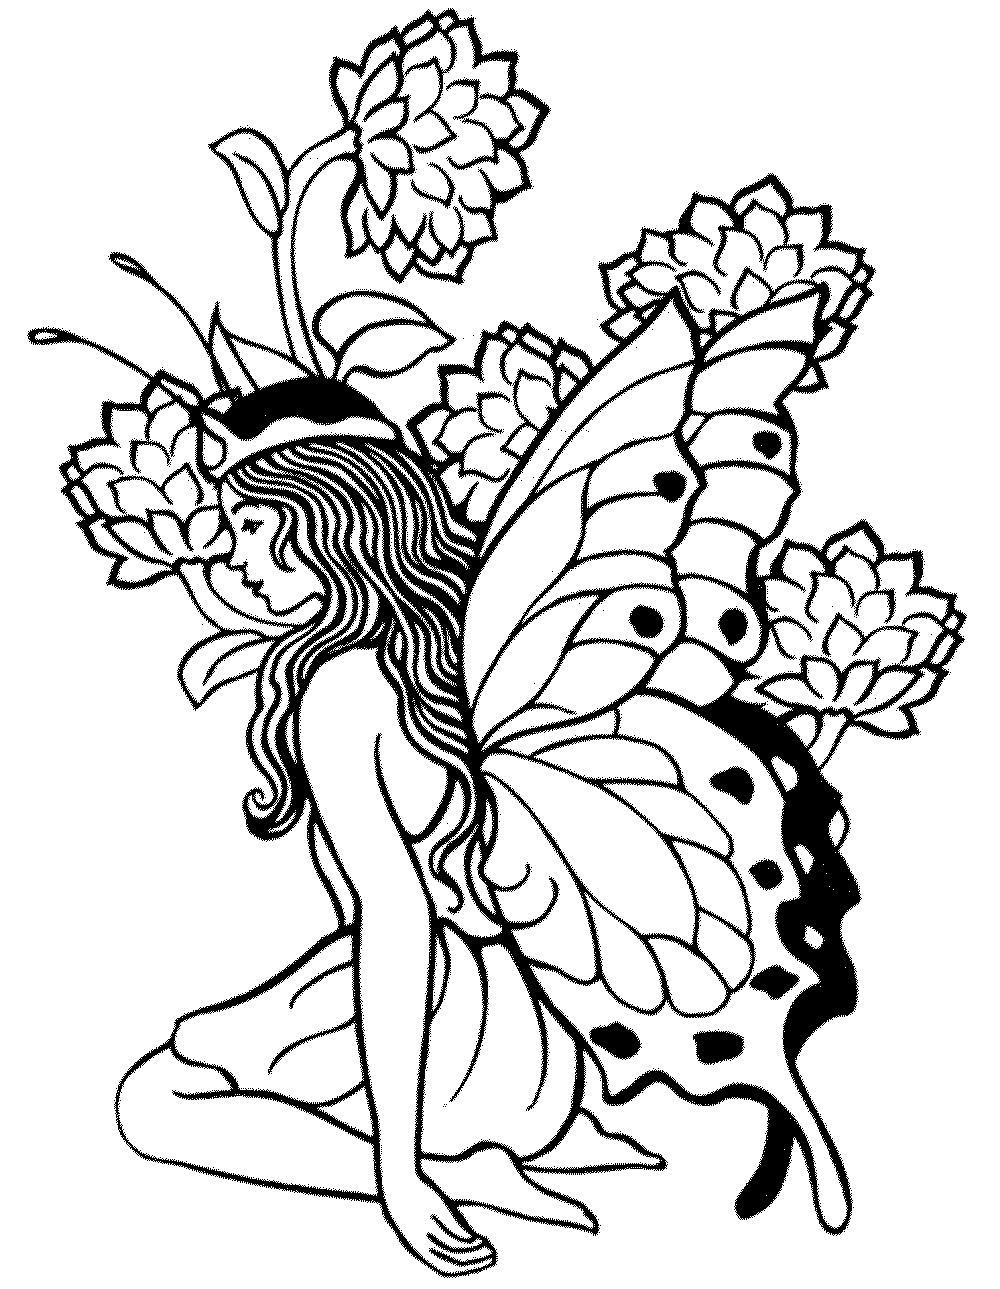 Printable Coloring Pages Adults Free
 Free Coloring Pages For Adults Printable Detailed Image 23